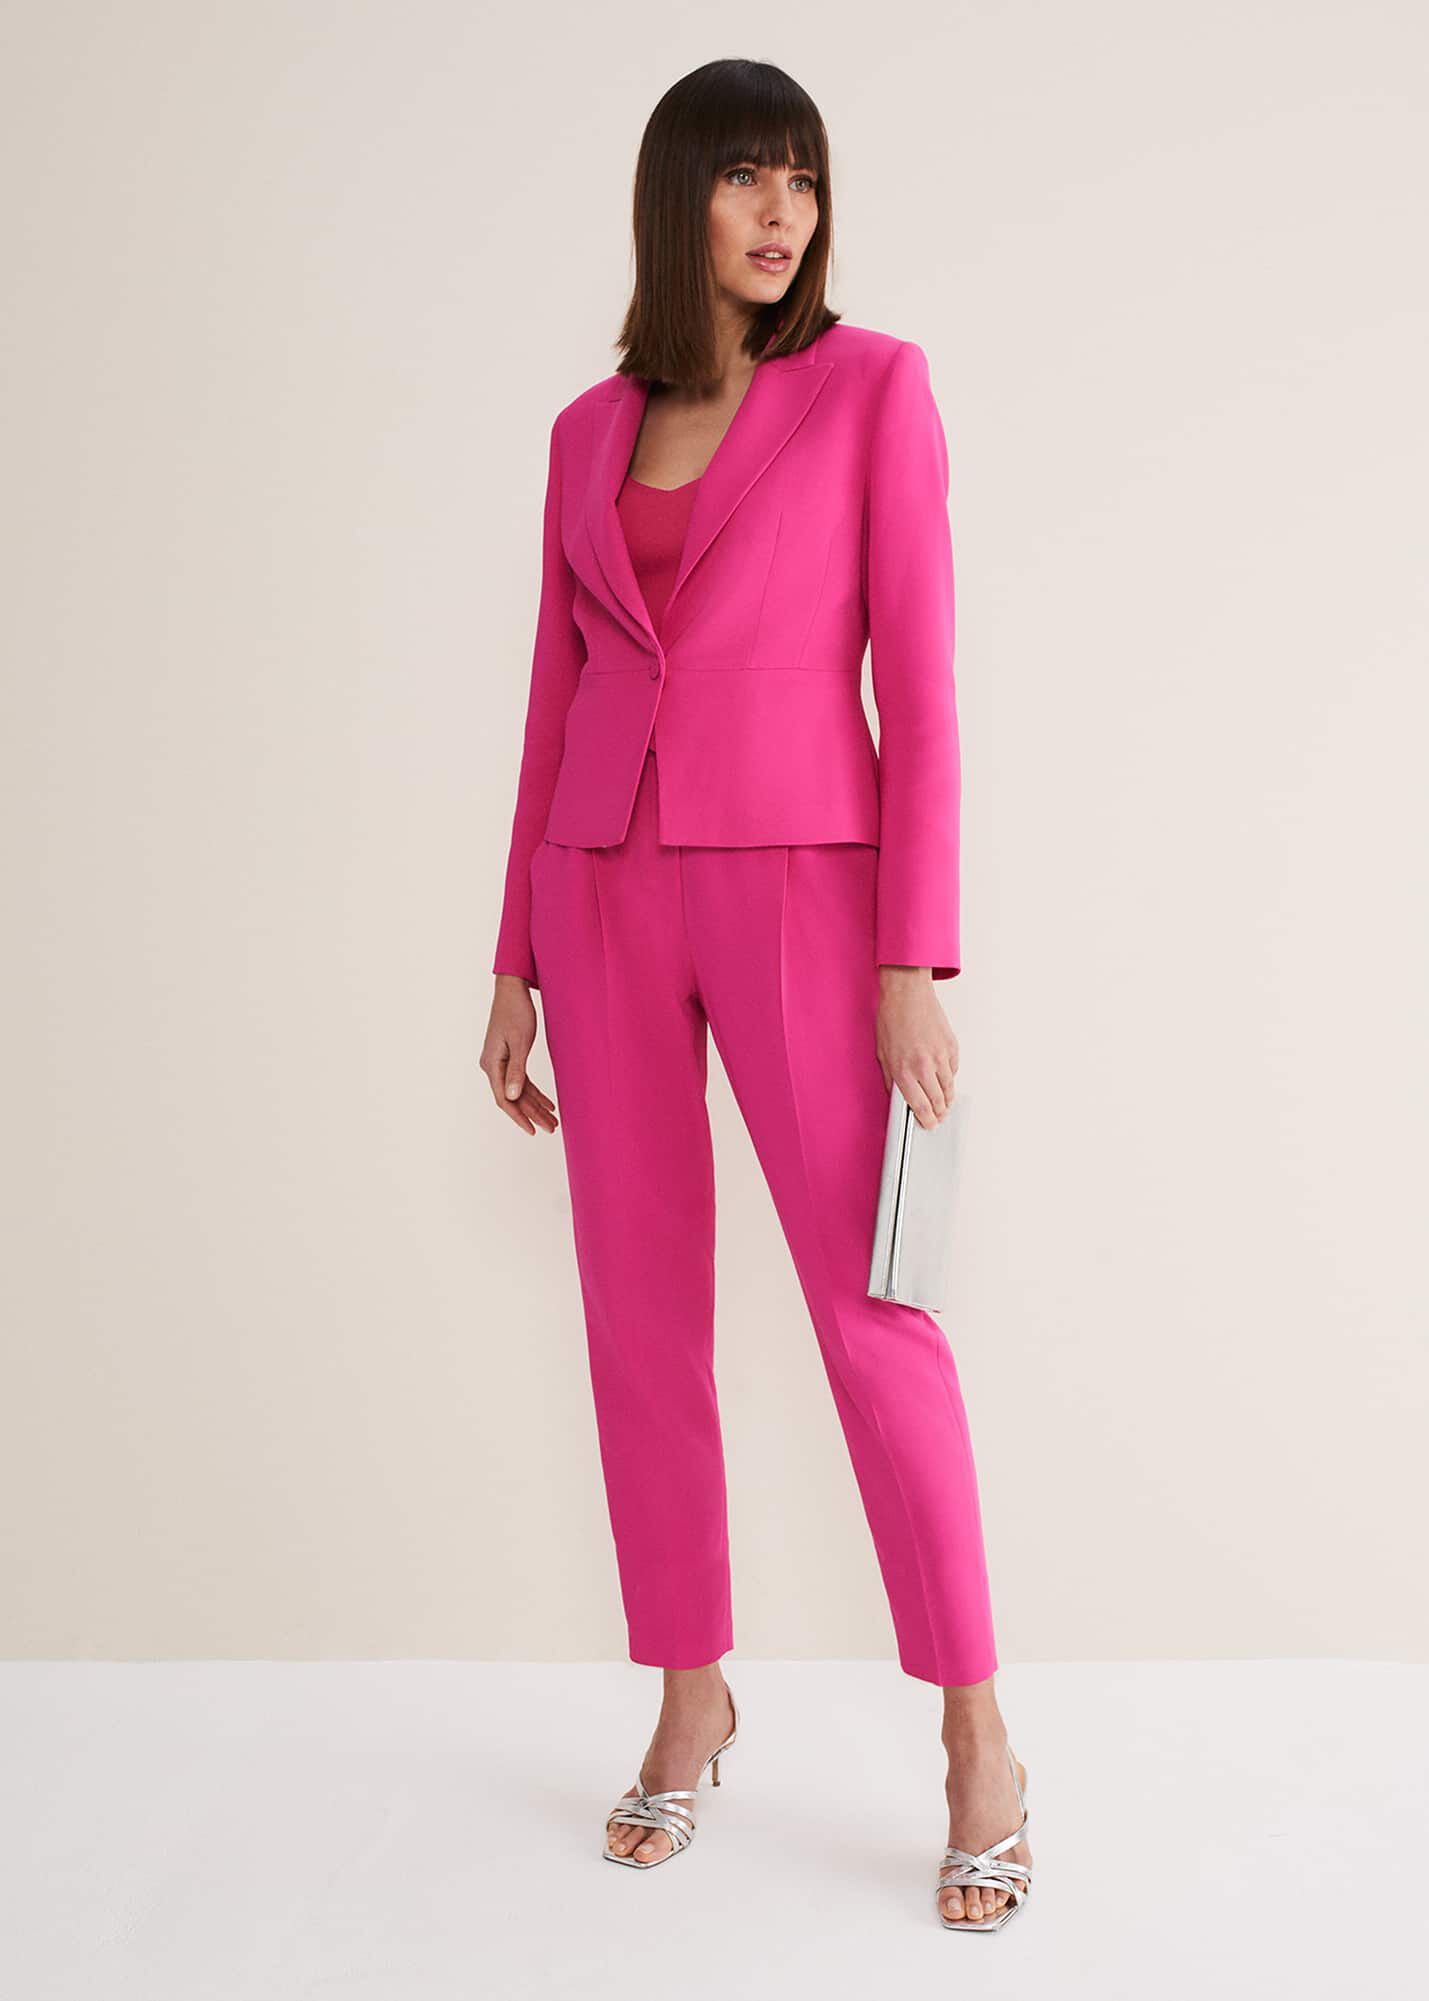 22 Wedding Suits for Women in 2021